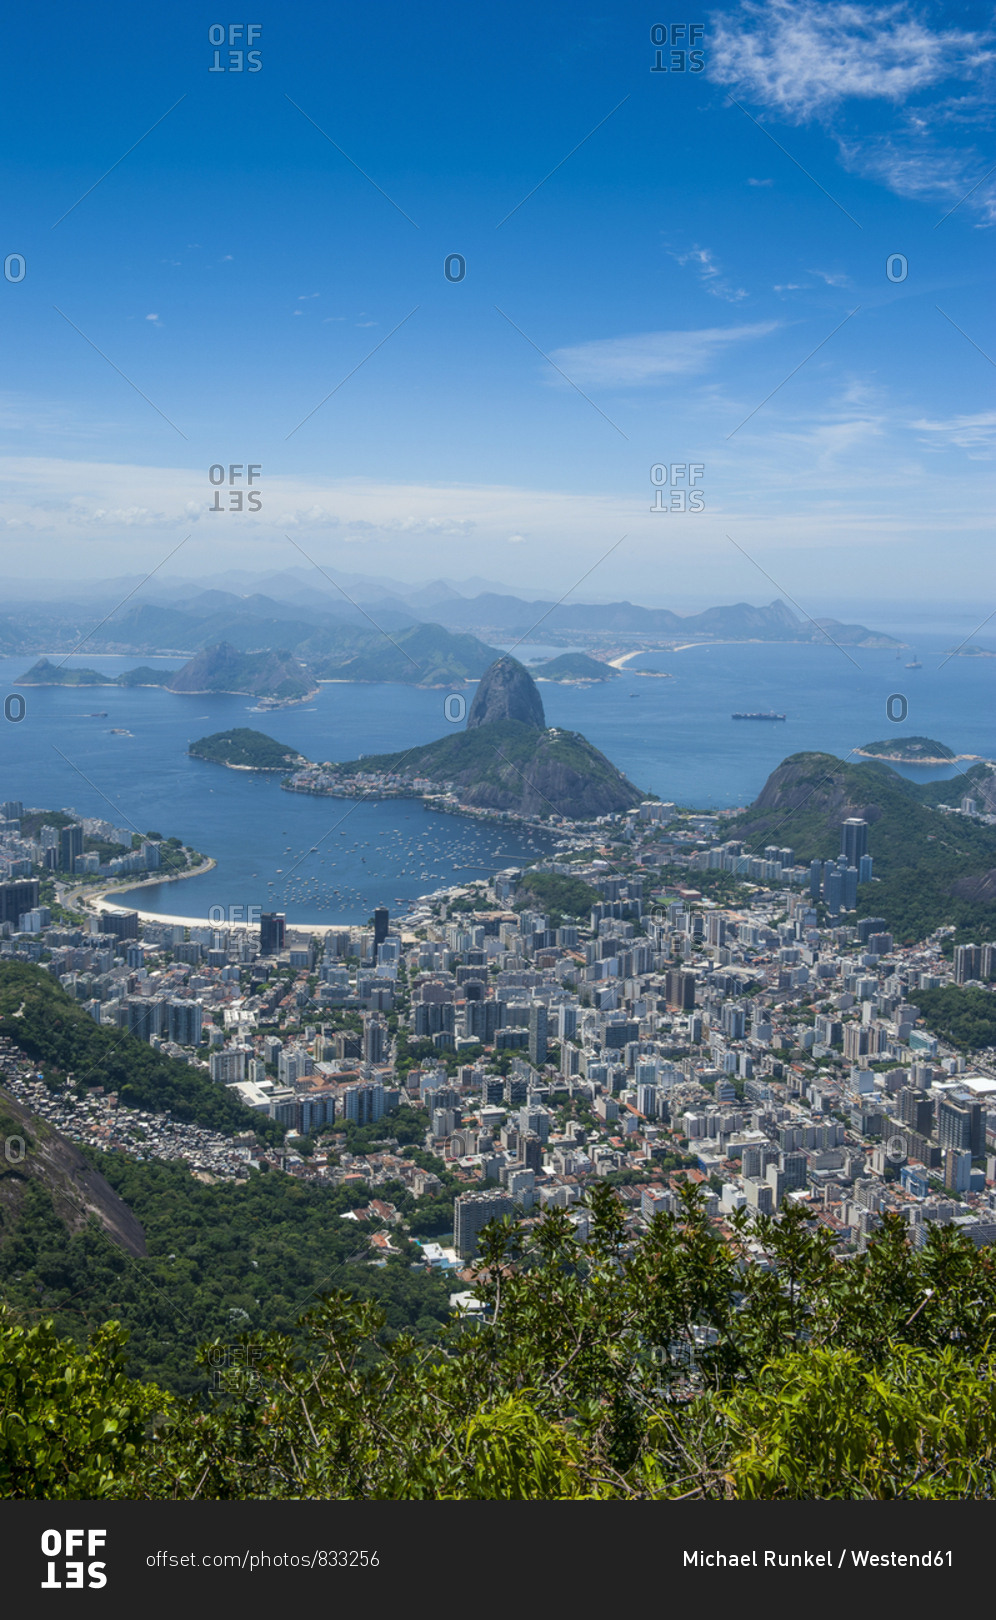 Outlook from the Christ the Redeemer statue over Rio de Janeiro with Sugarloaf Mountain- Brazil